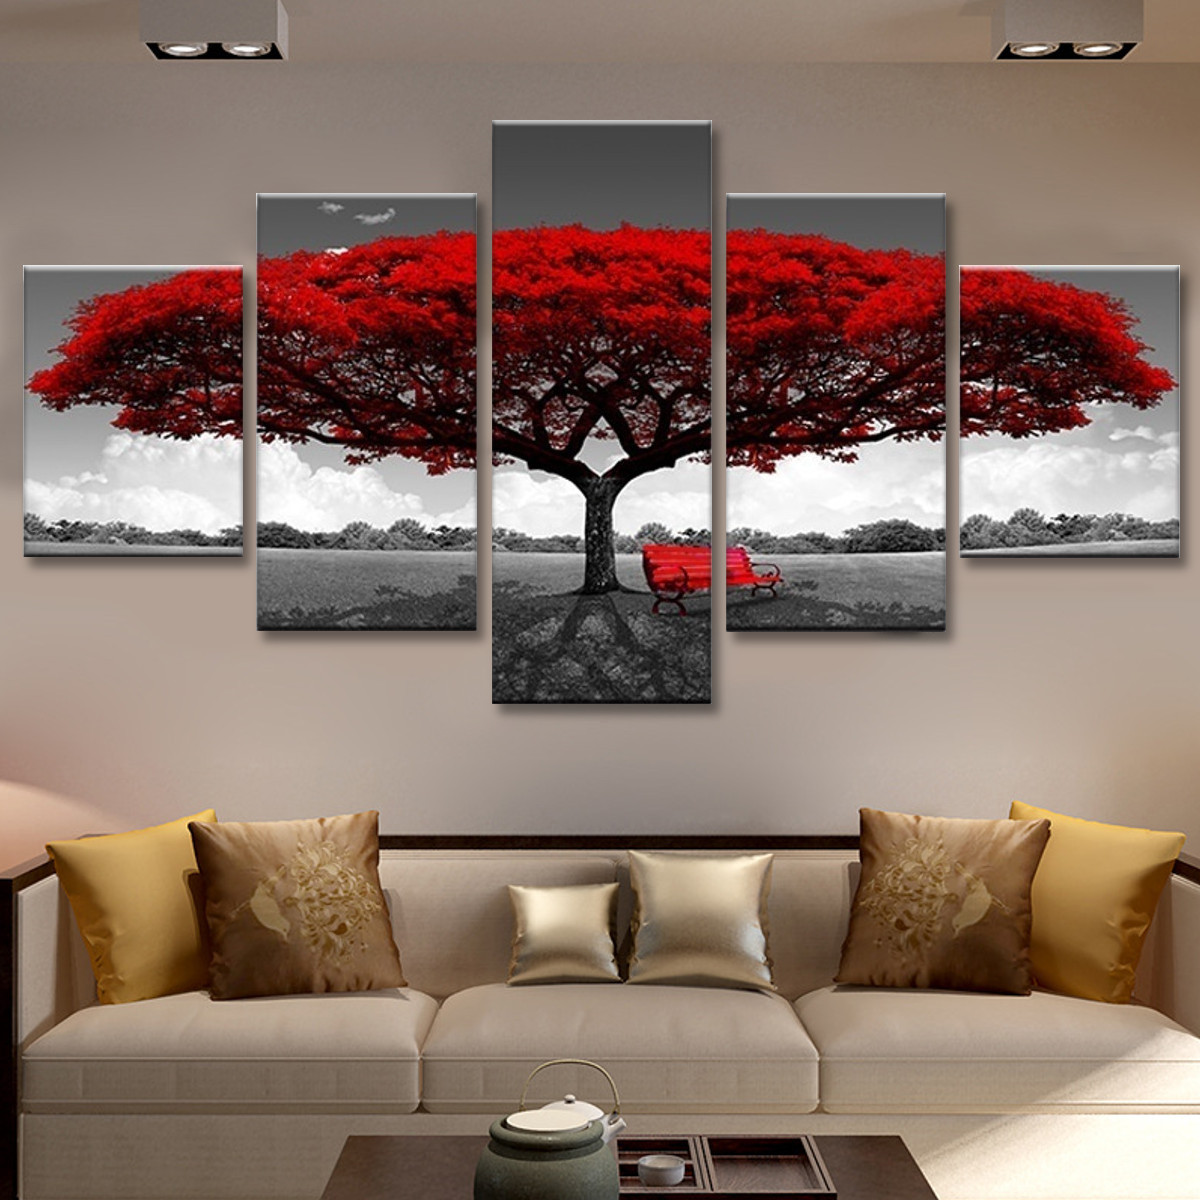 5Pcs-Red-Tree-Canvas-Paintings-Wall-Decorative-Print-Art-Pictures-Unframed-Wall-Hanging-Home-Office--1774551-4